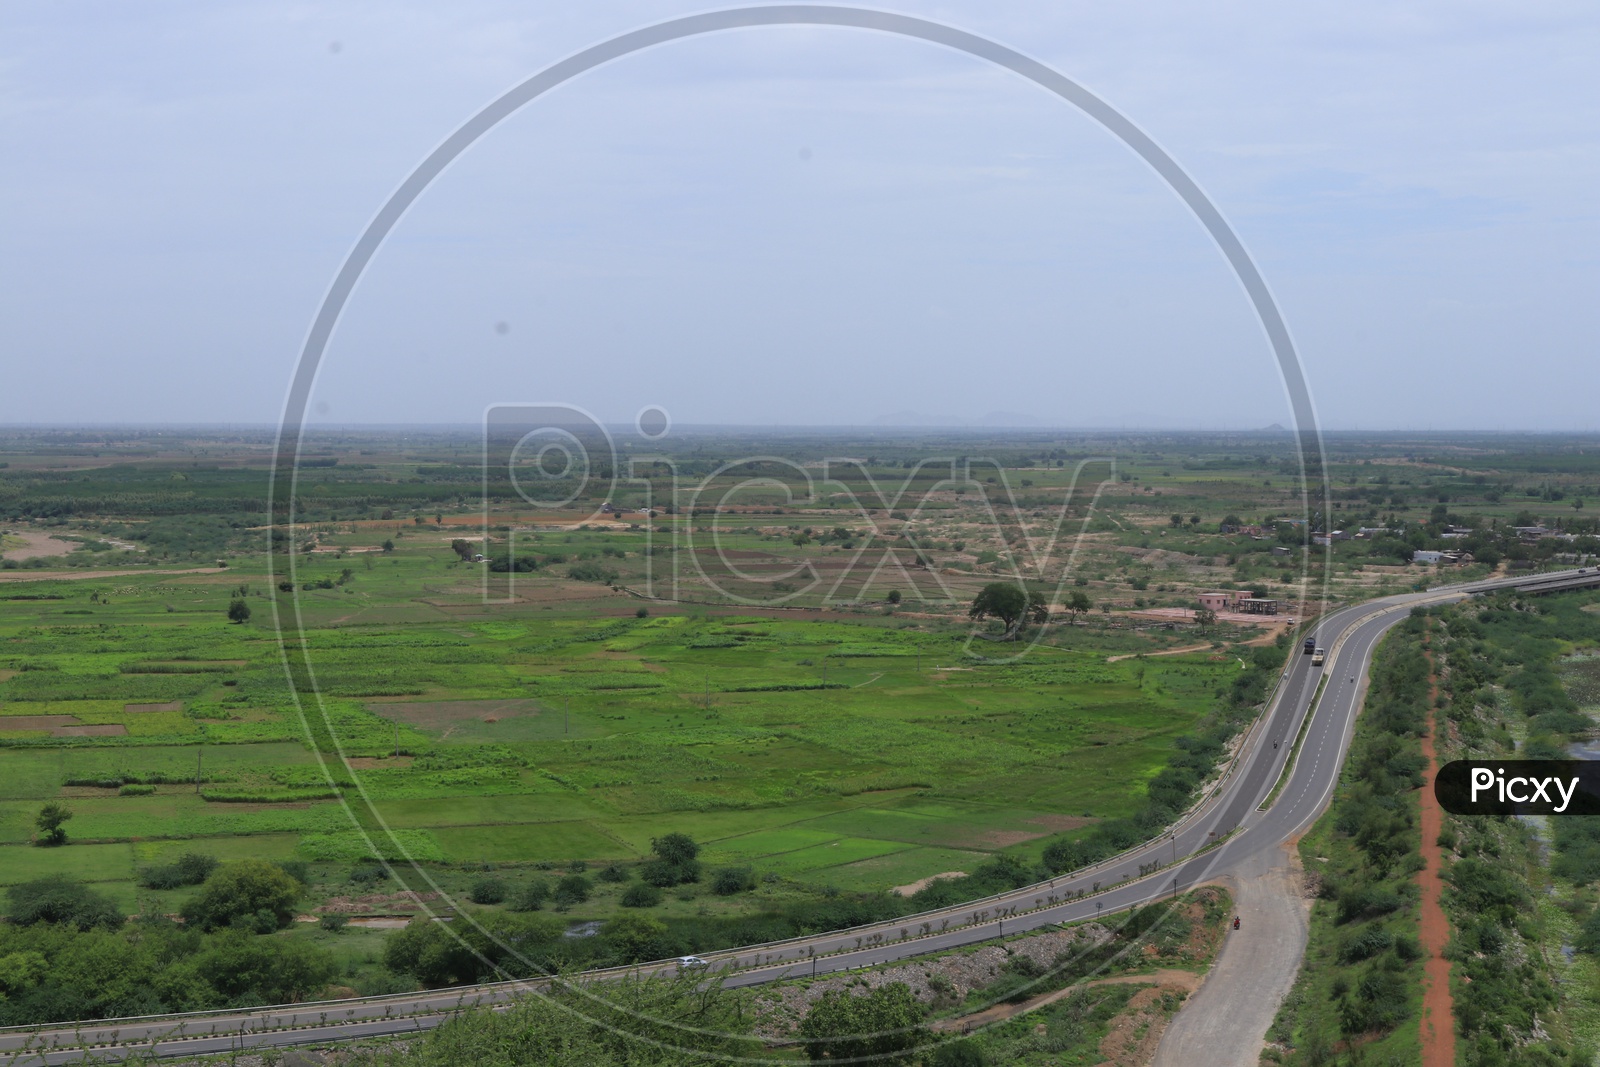 Aerial view of agriculture fields in Vijayawada With highway